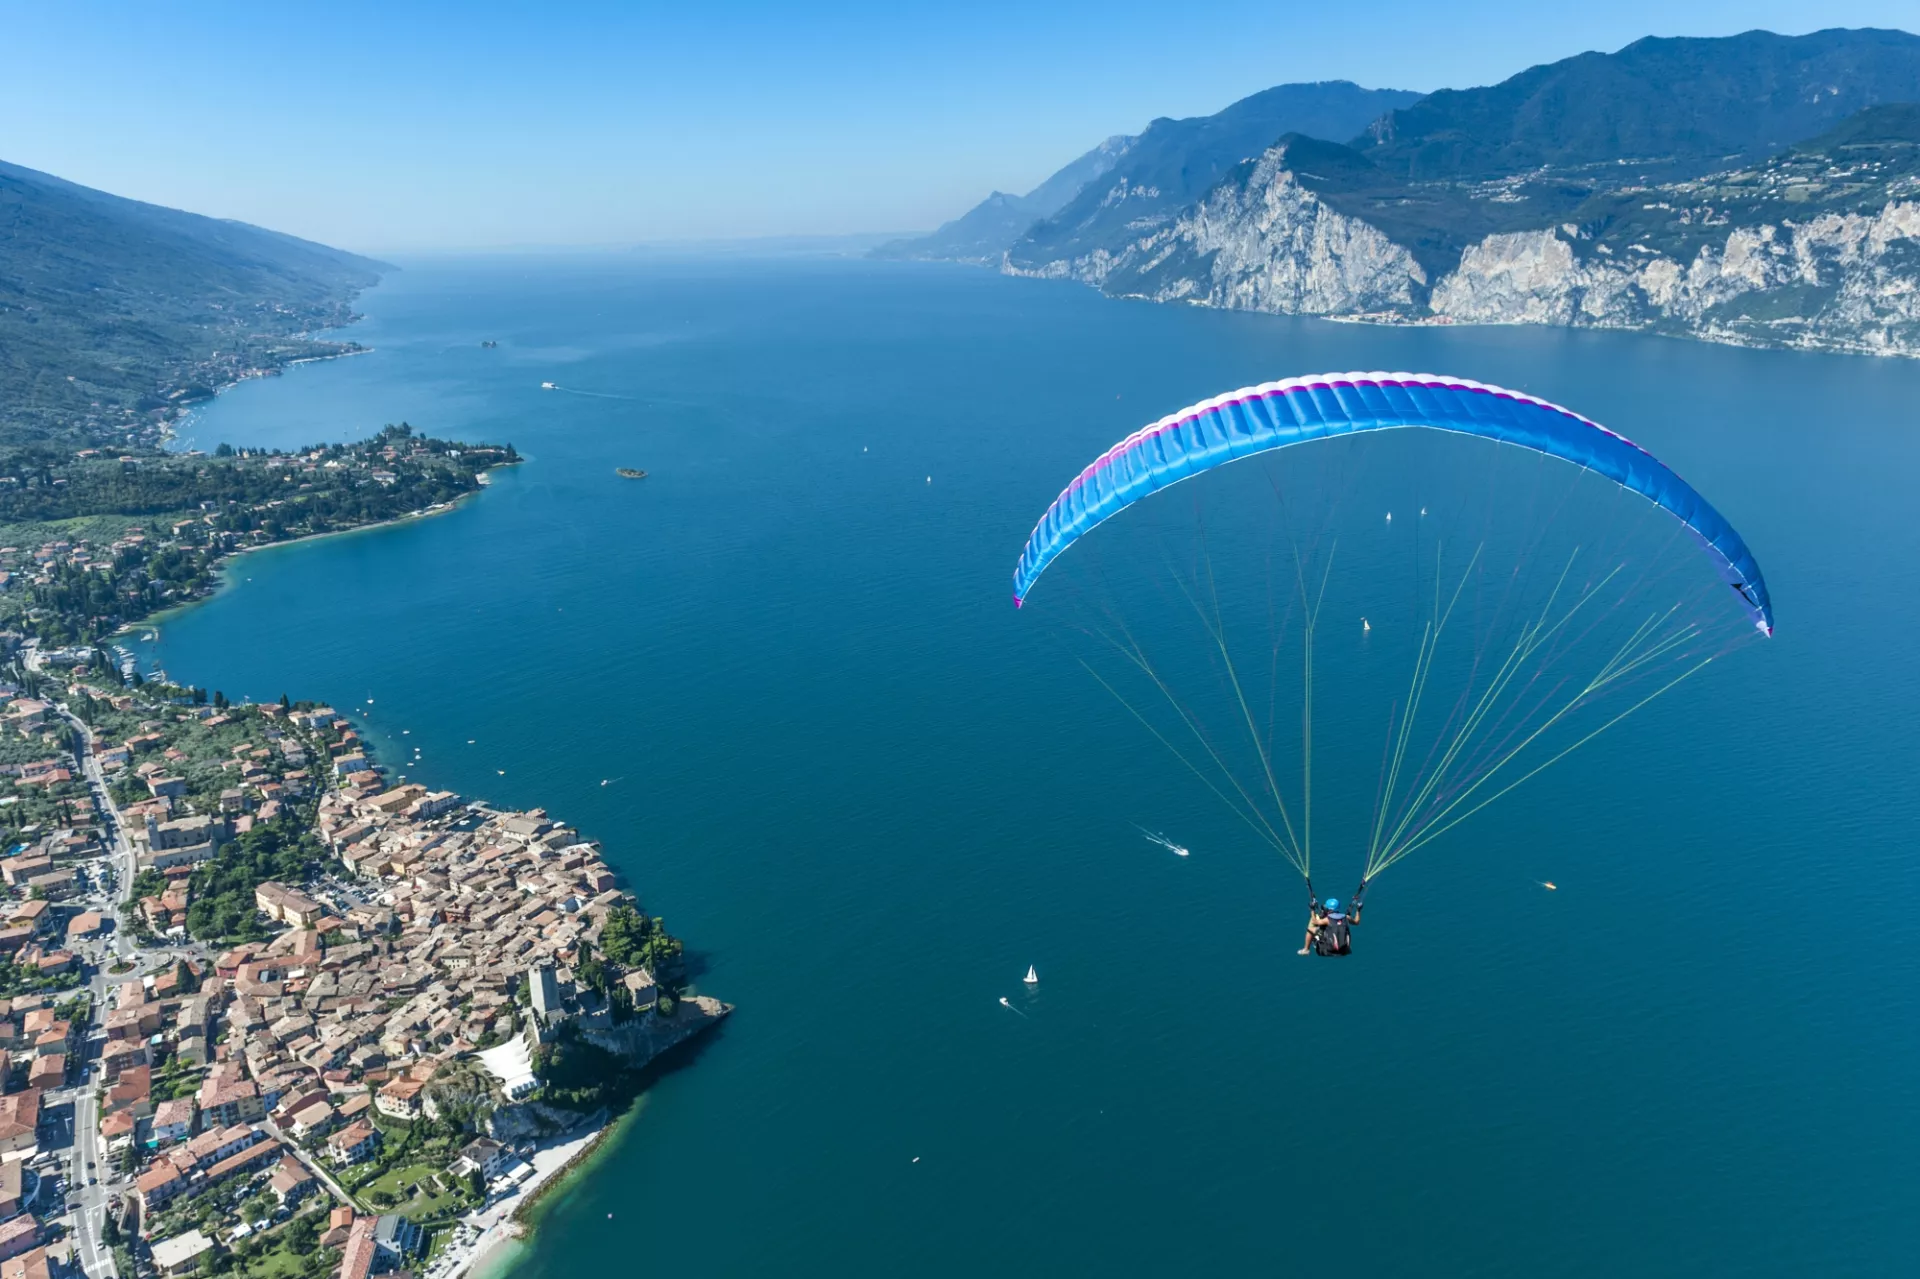 Roberto Paragliding Malcesine in Italy, Europe | Paragliding - Rated 1.2